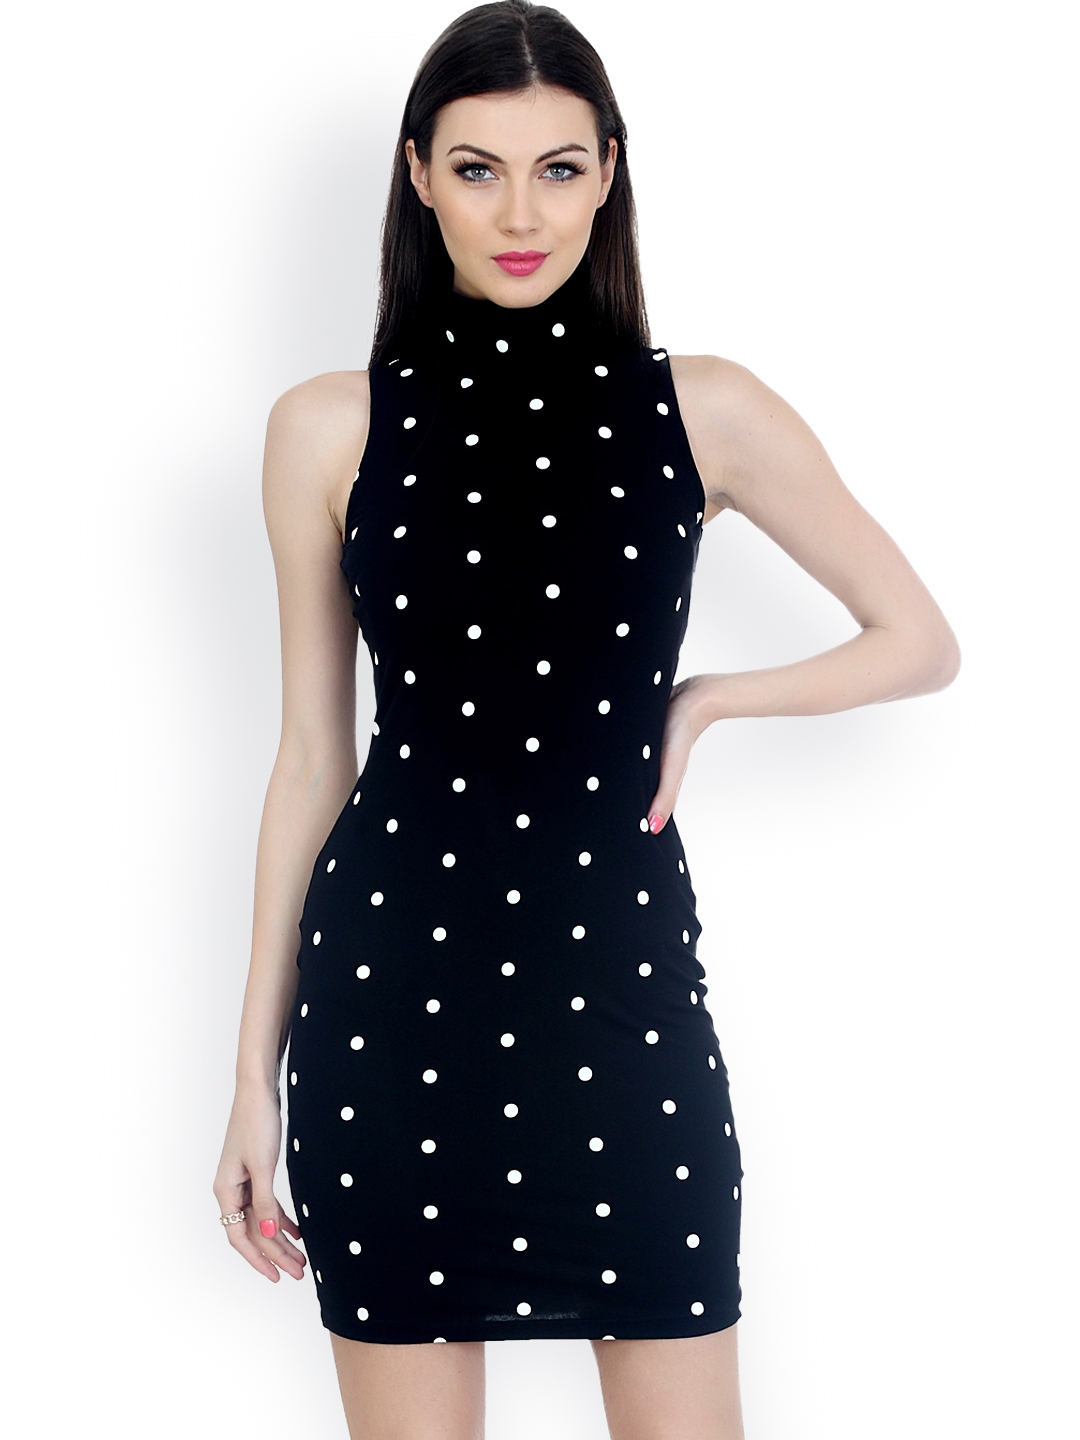 Buy FabAlley Black Printed Bodycon Dress Dresses for